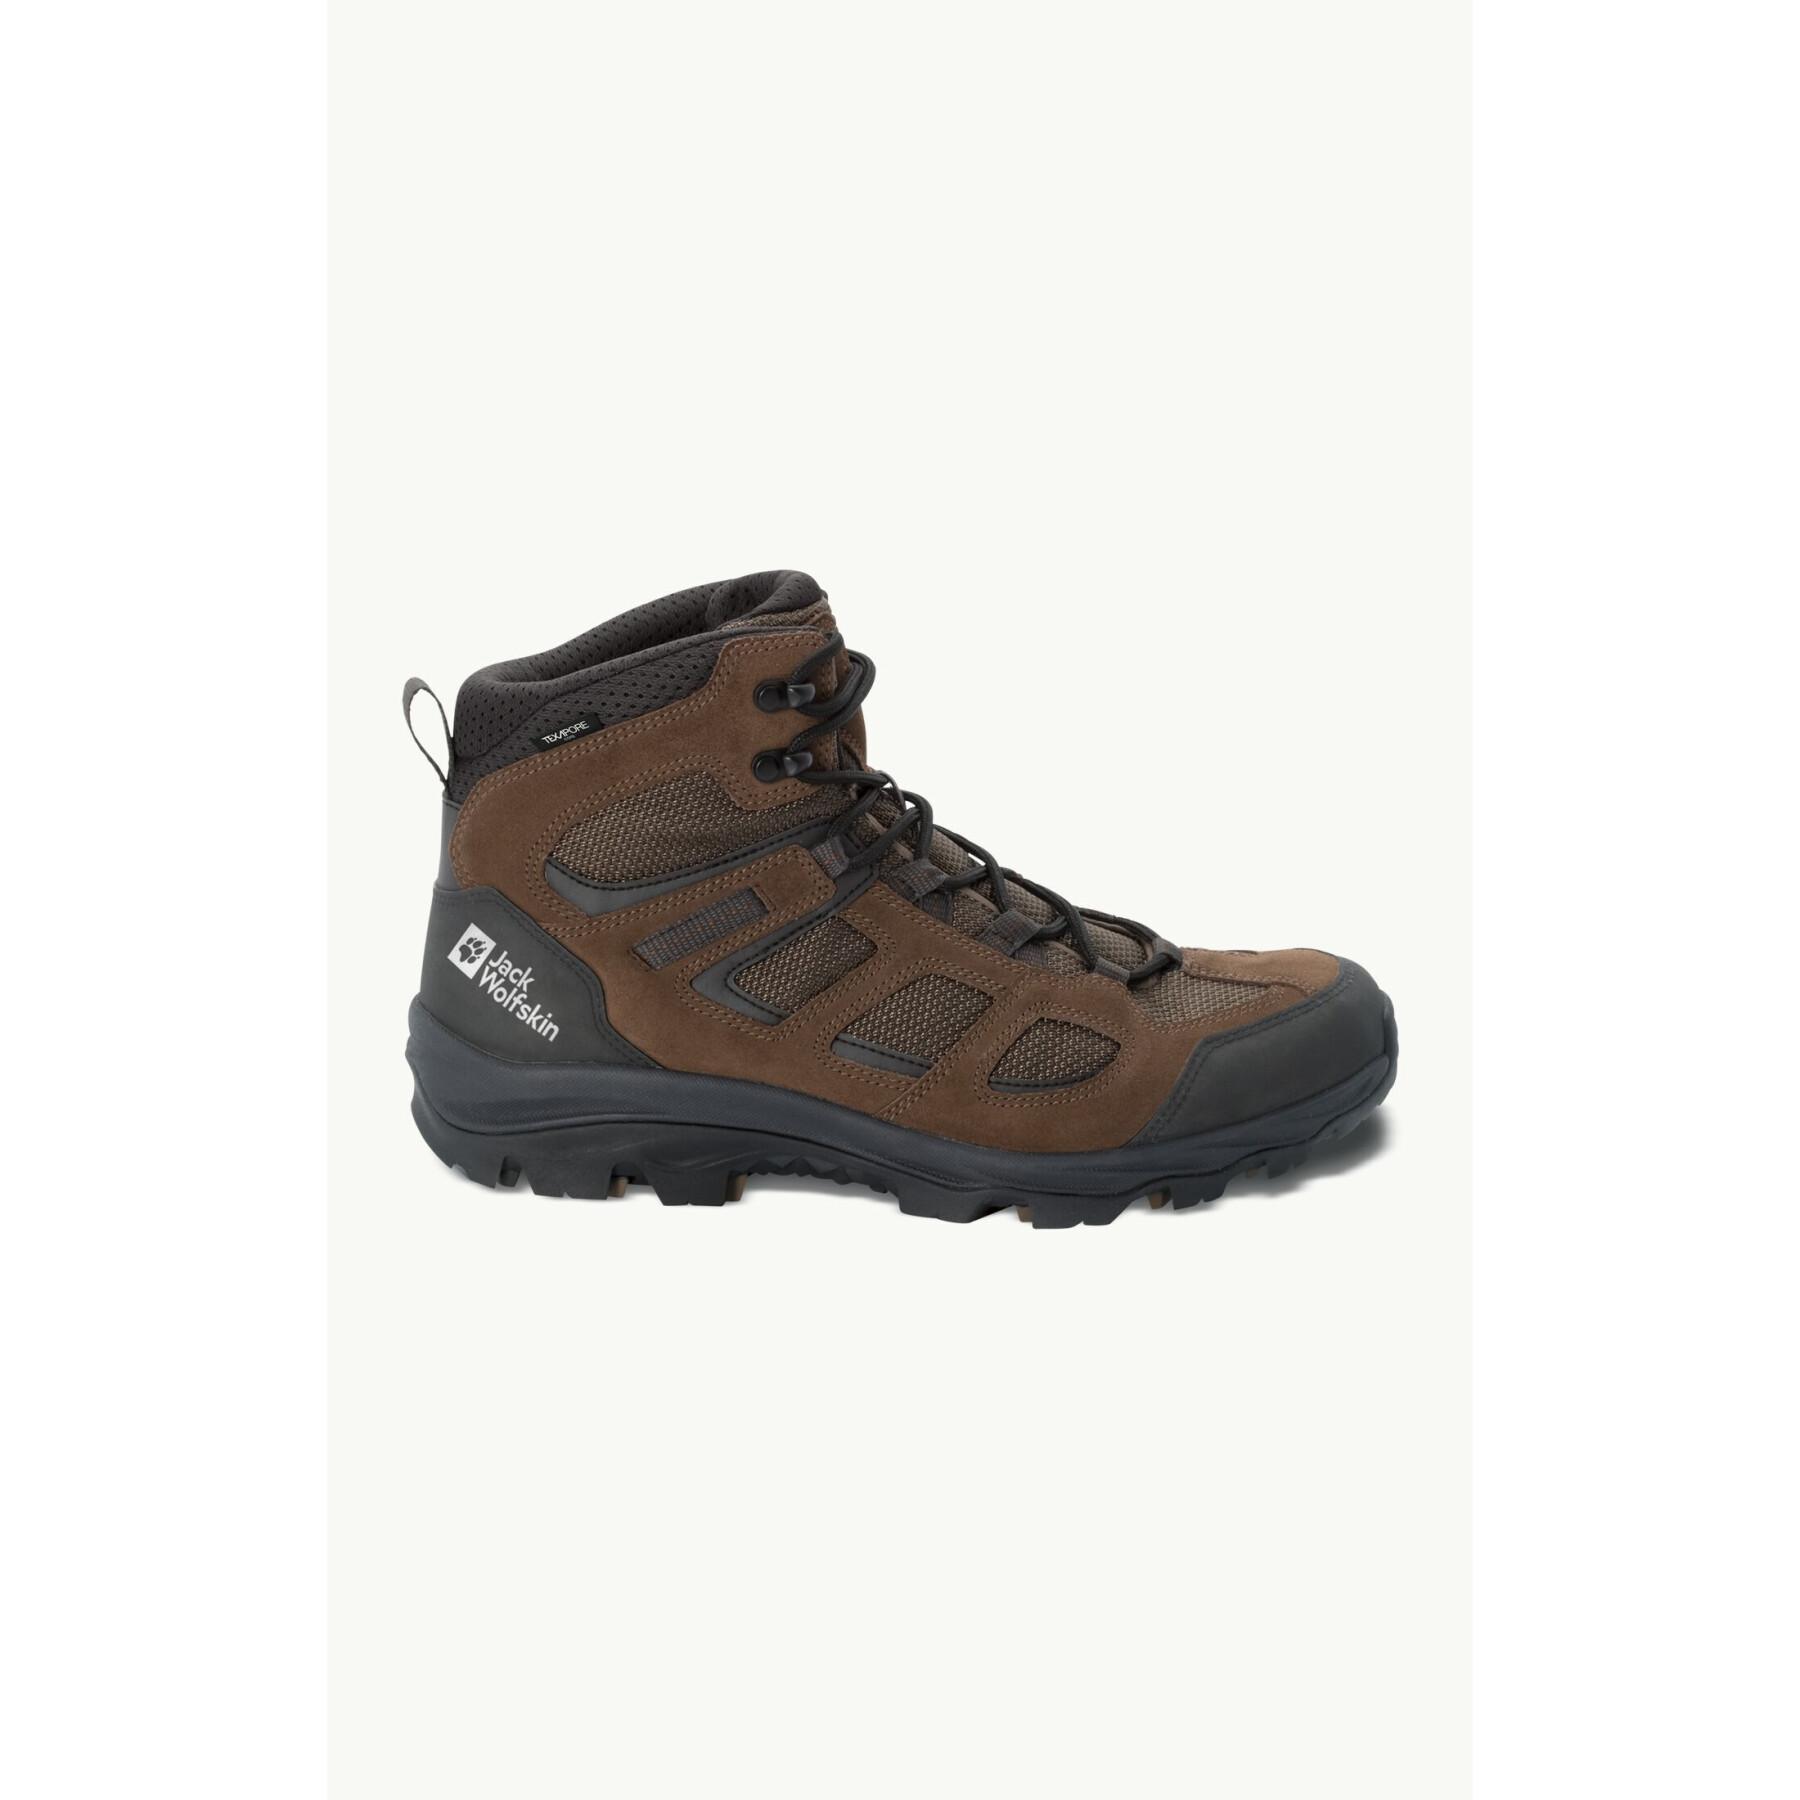 Mid-height hiking boots Jack Wolfskin Vojo 3 Texapore